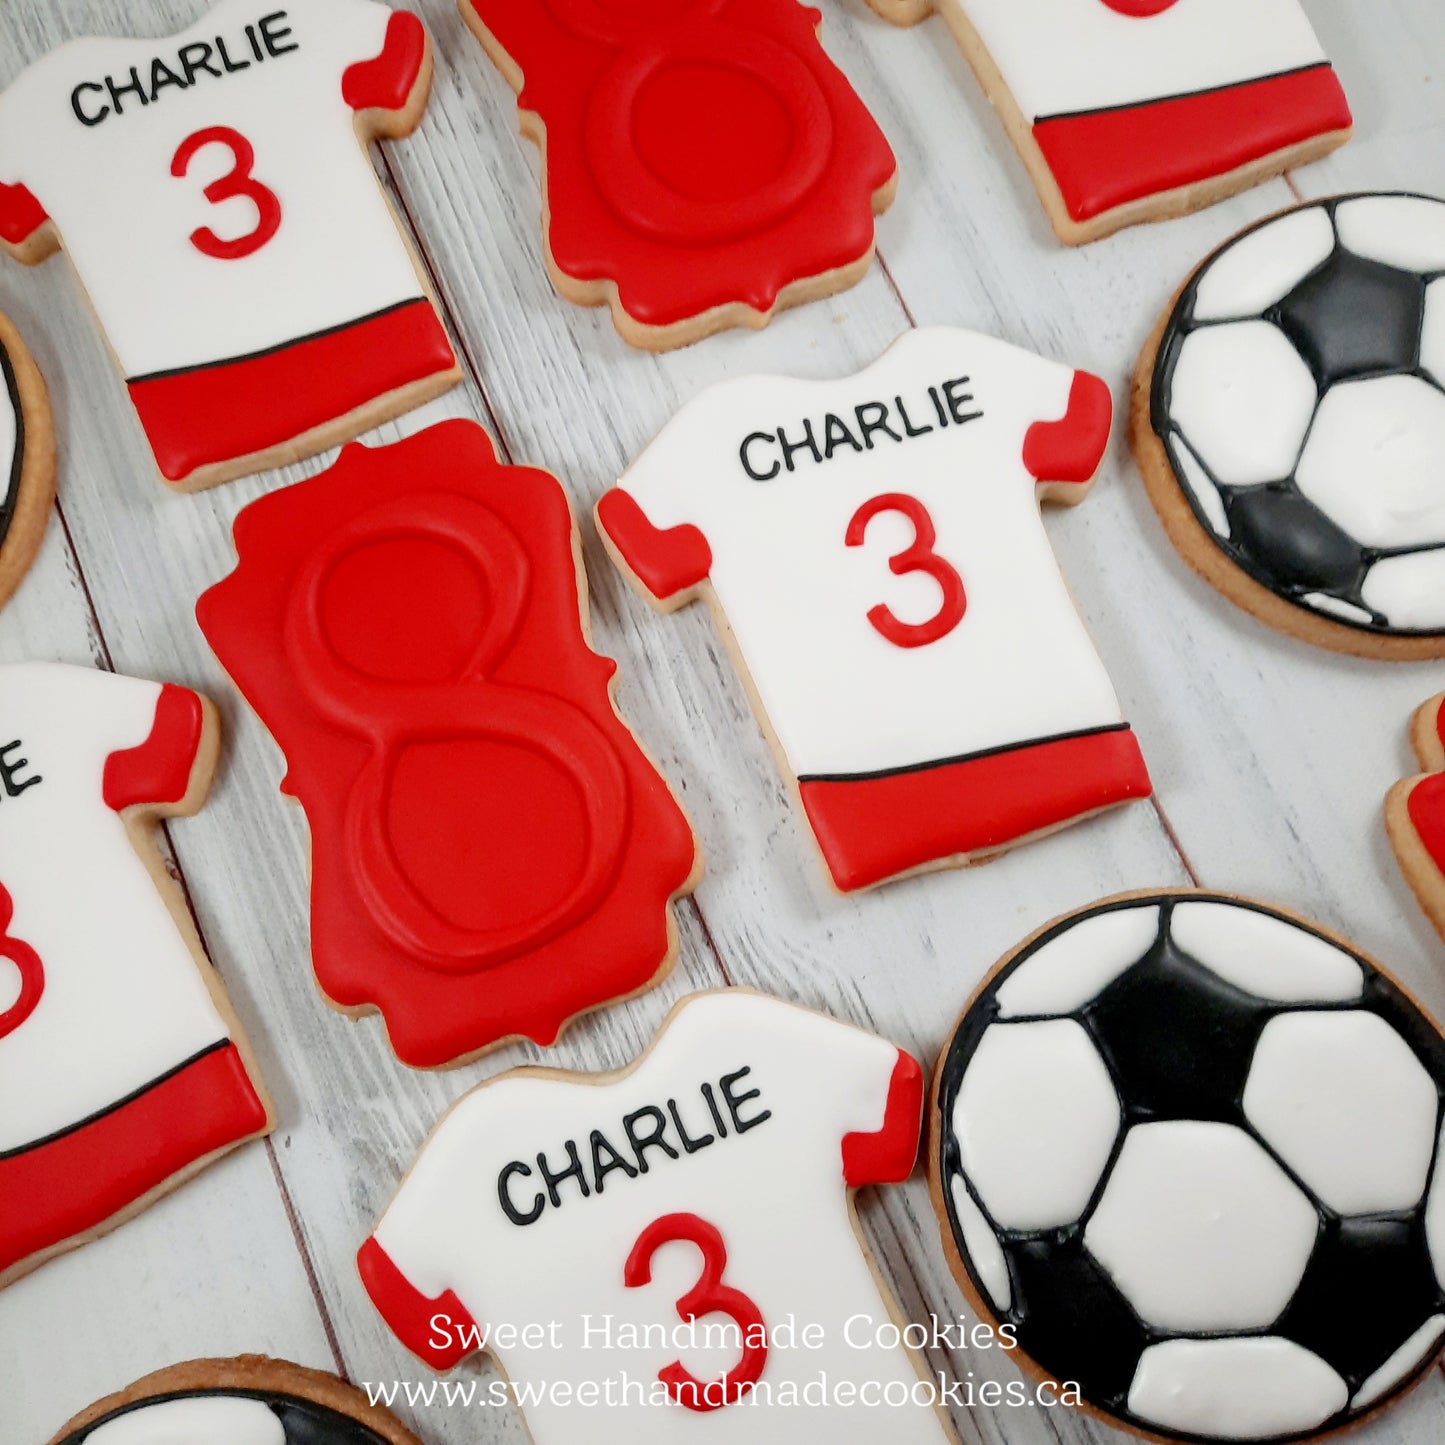 Soccer Jersey Cookies for Charlie